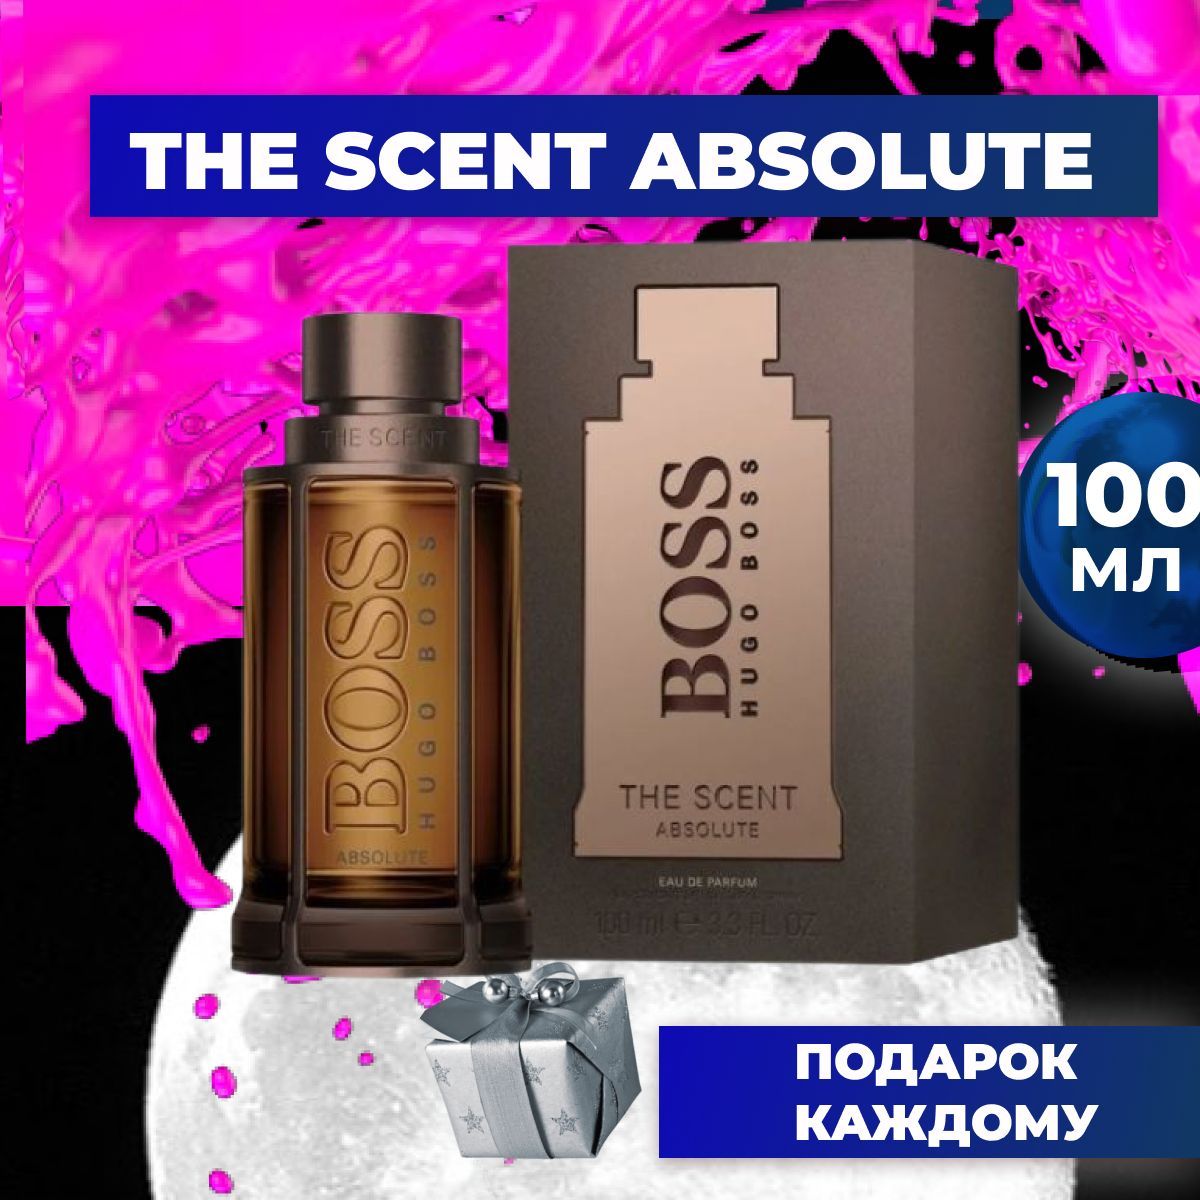 The scent absolute. Boss the Scent absolute. Парфюмерная вода Hugo Boss the Scent absolute for her. Absolut 100h021.